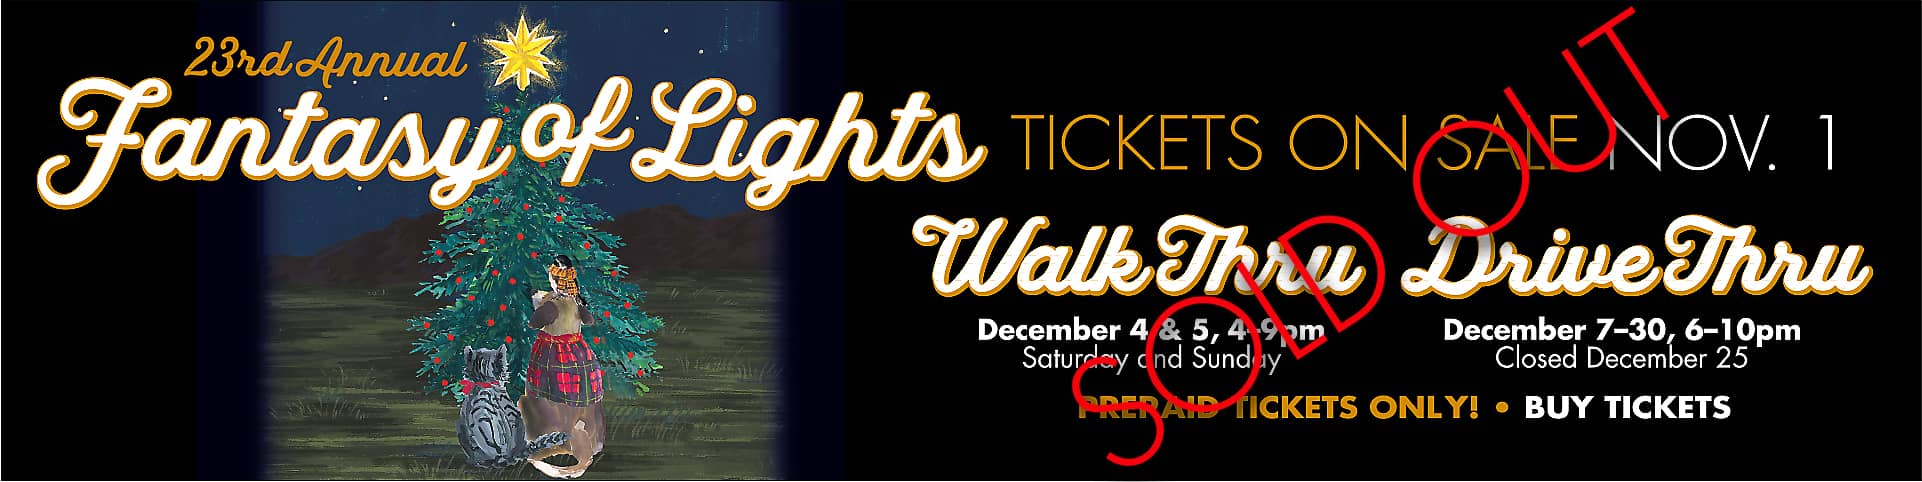 23rd Annual Fantasy of Lights Walk Thru and Drive Thru Tickets sold out